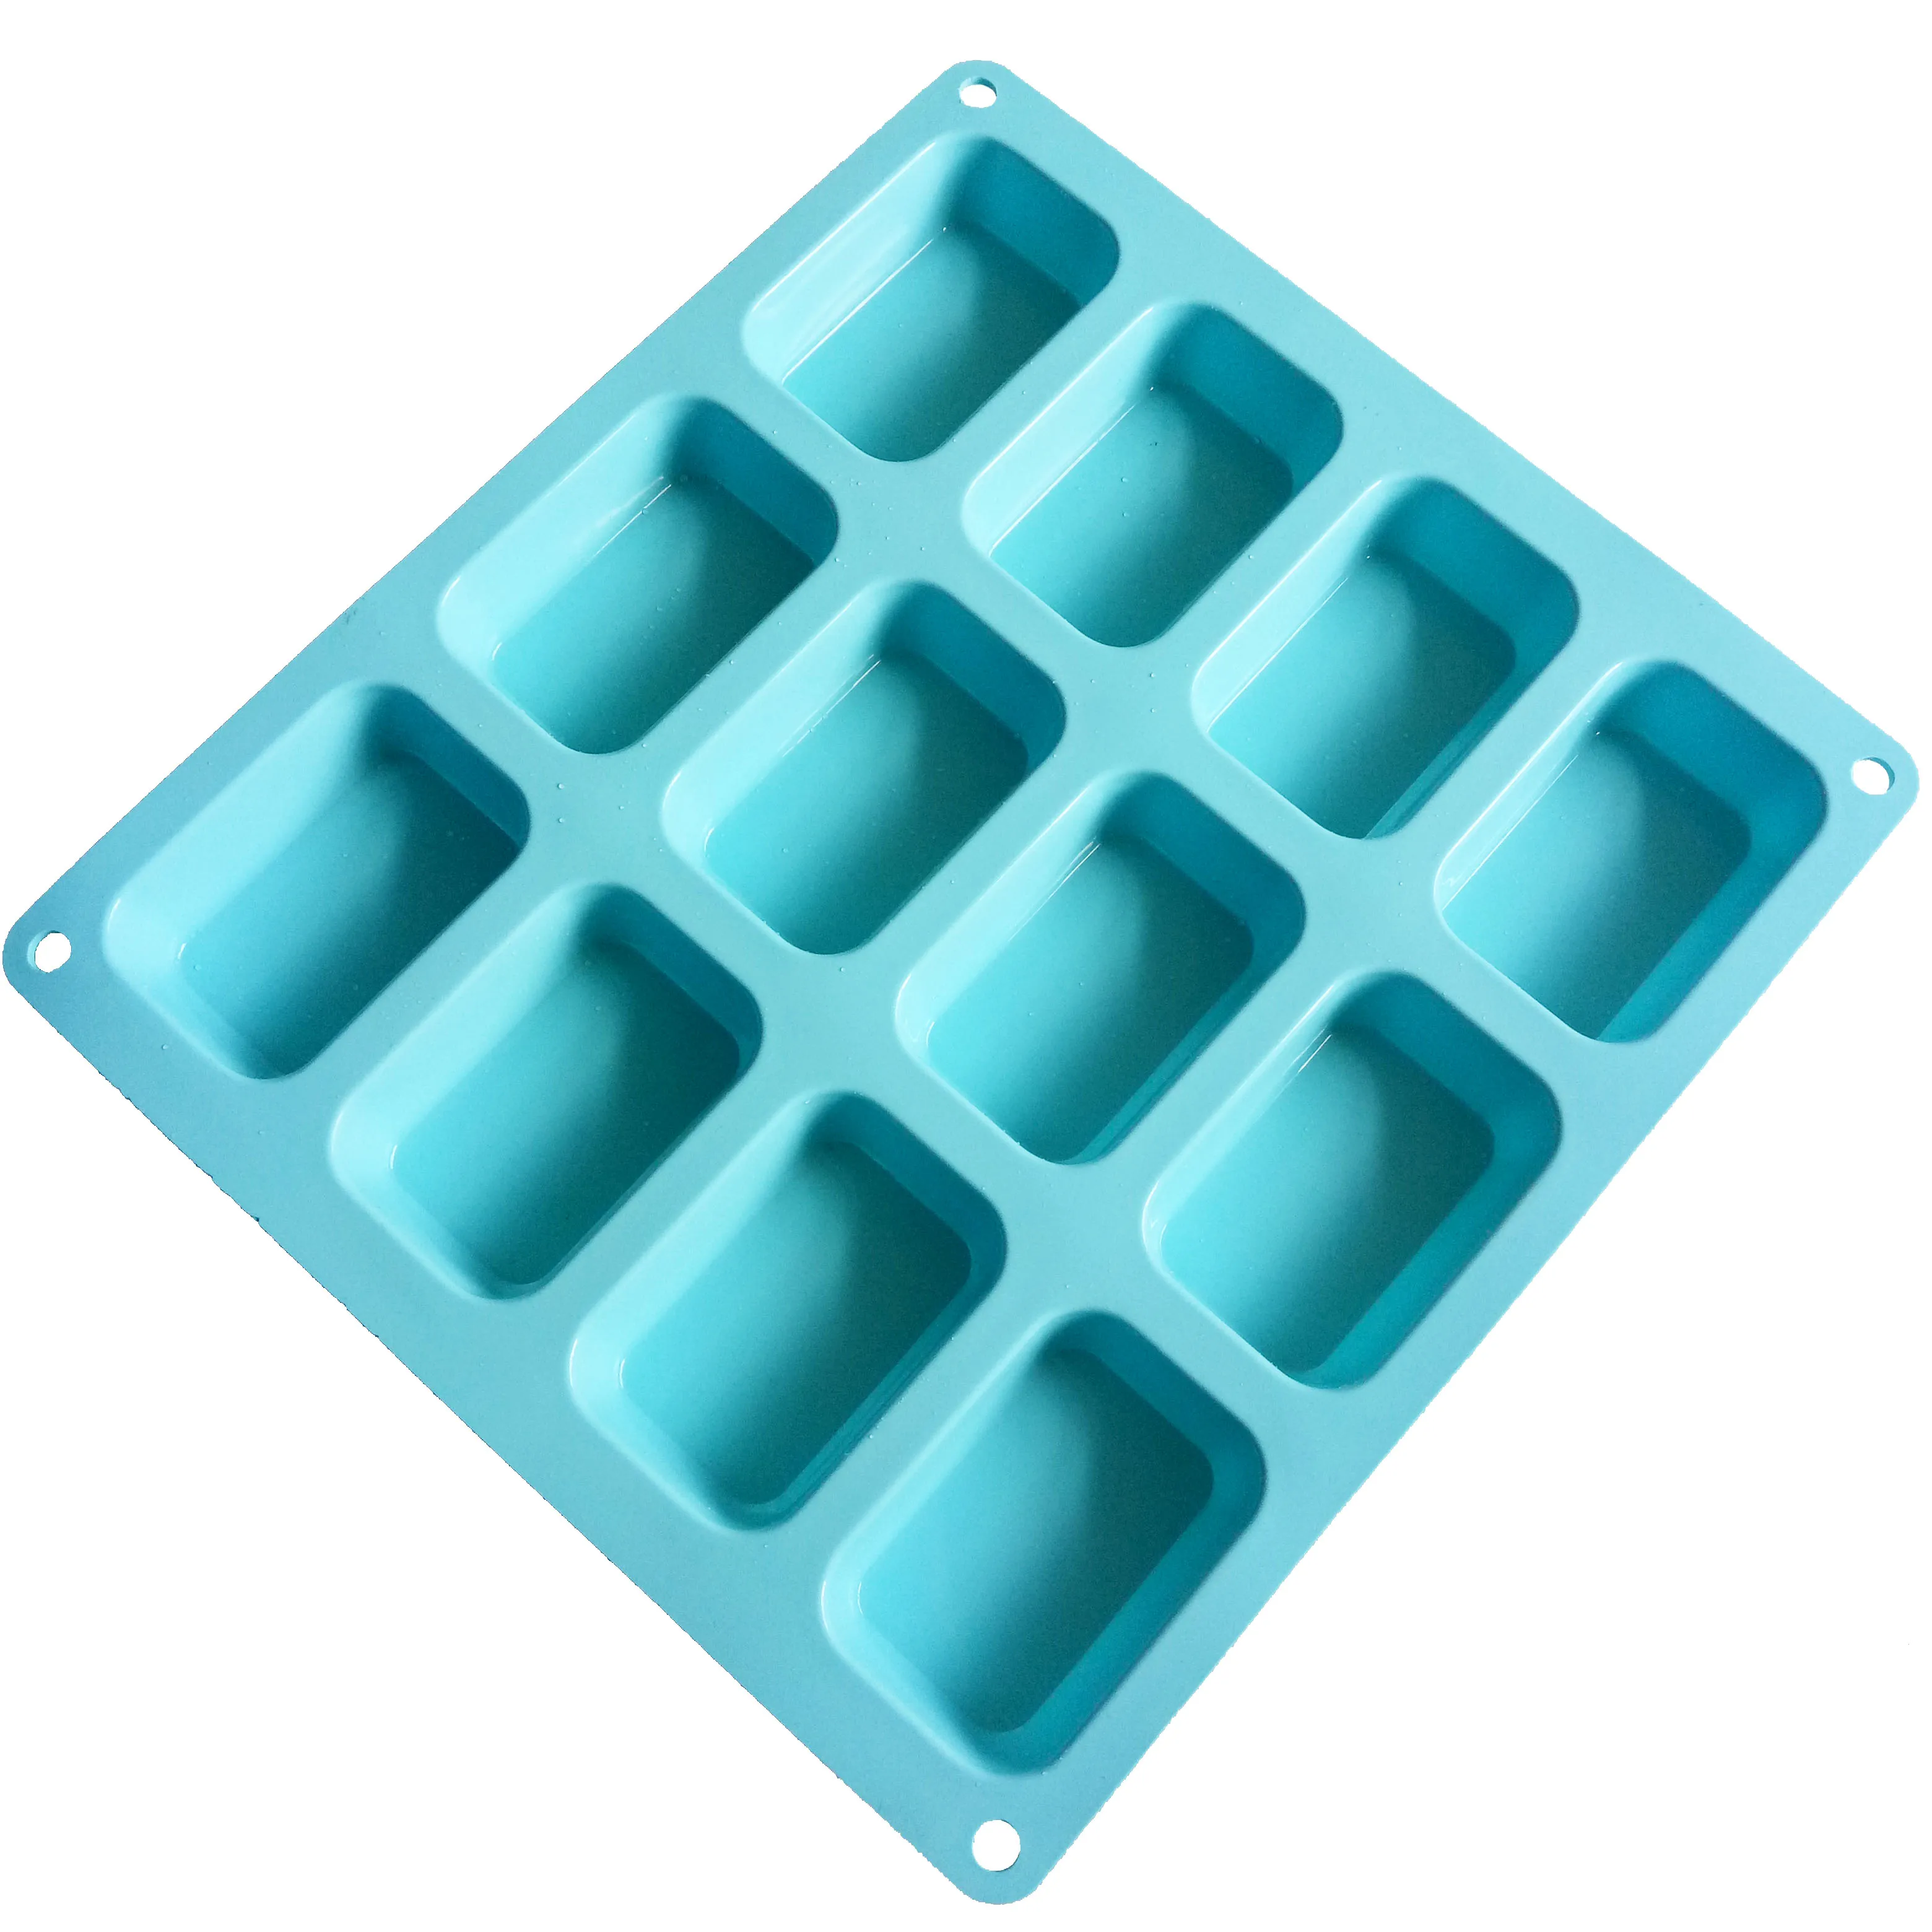 Ndier Torta in Silicone Bar per Torte Muffin Handmade Soap Moulds Biscuit Chocolate Ice Cube Tray DIY Mold 12 Oblongs rettangolo 